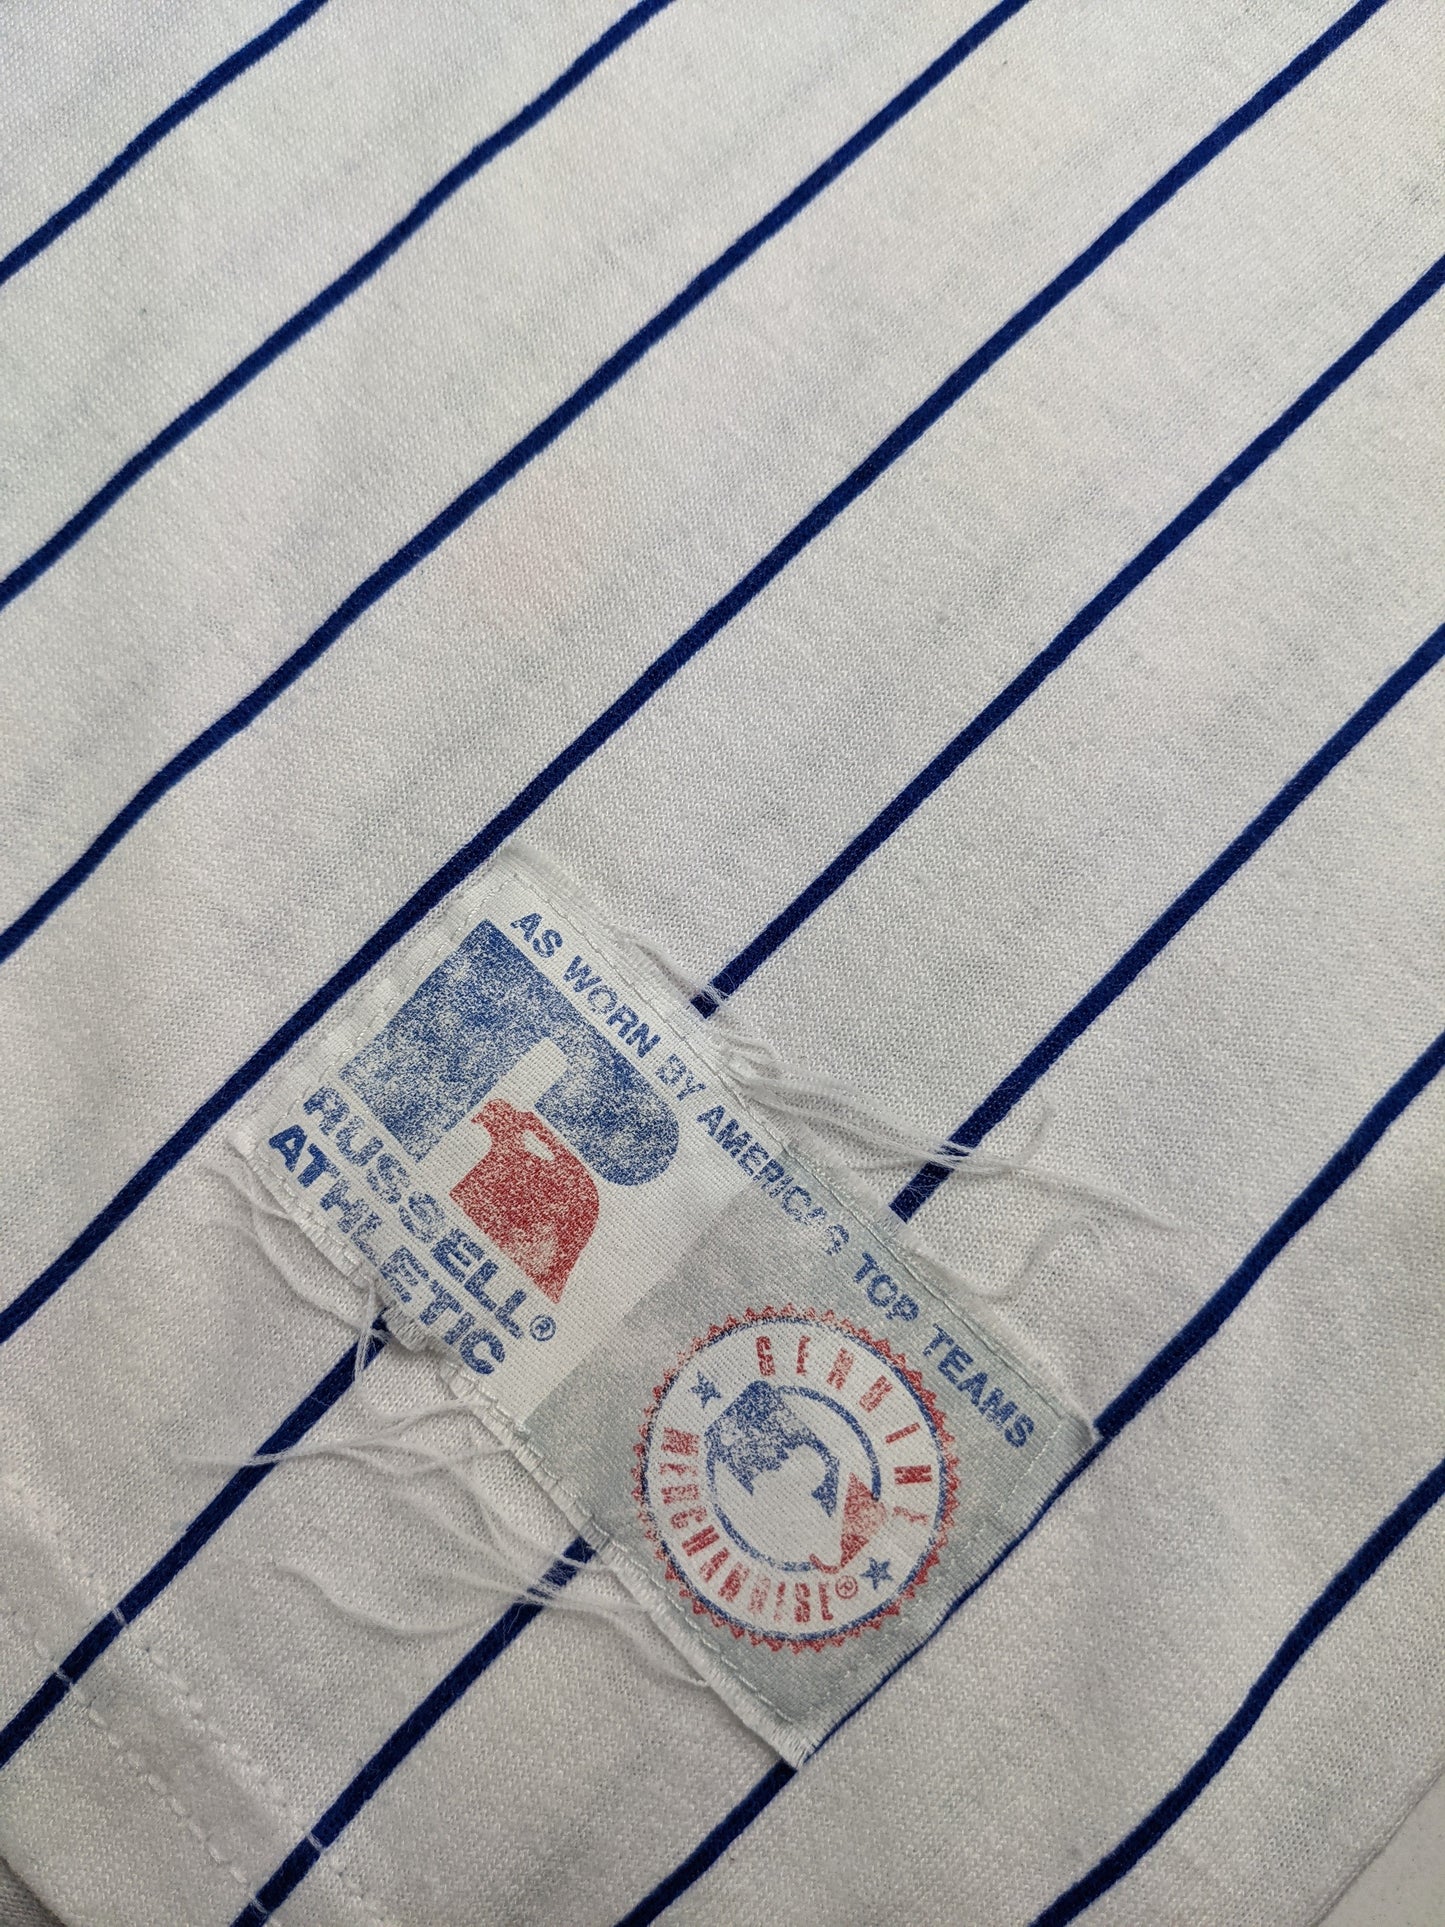 Russell Athletic Chicago Cubs MLB Fan Shop